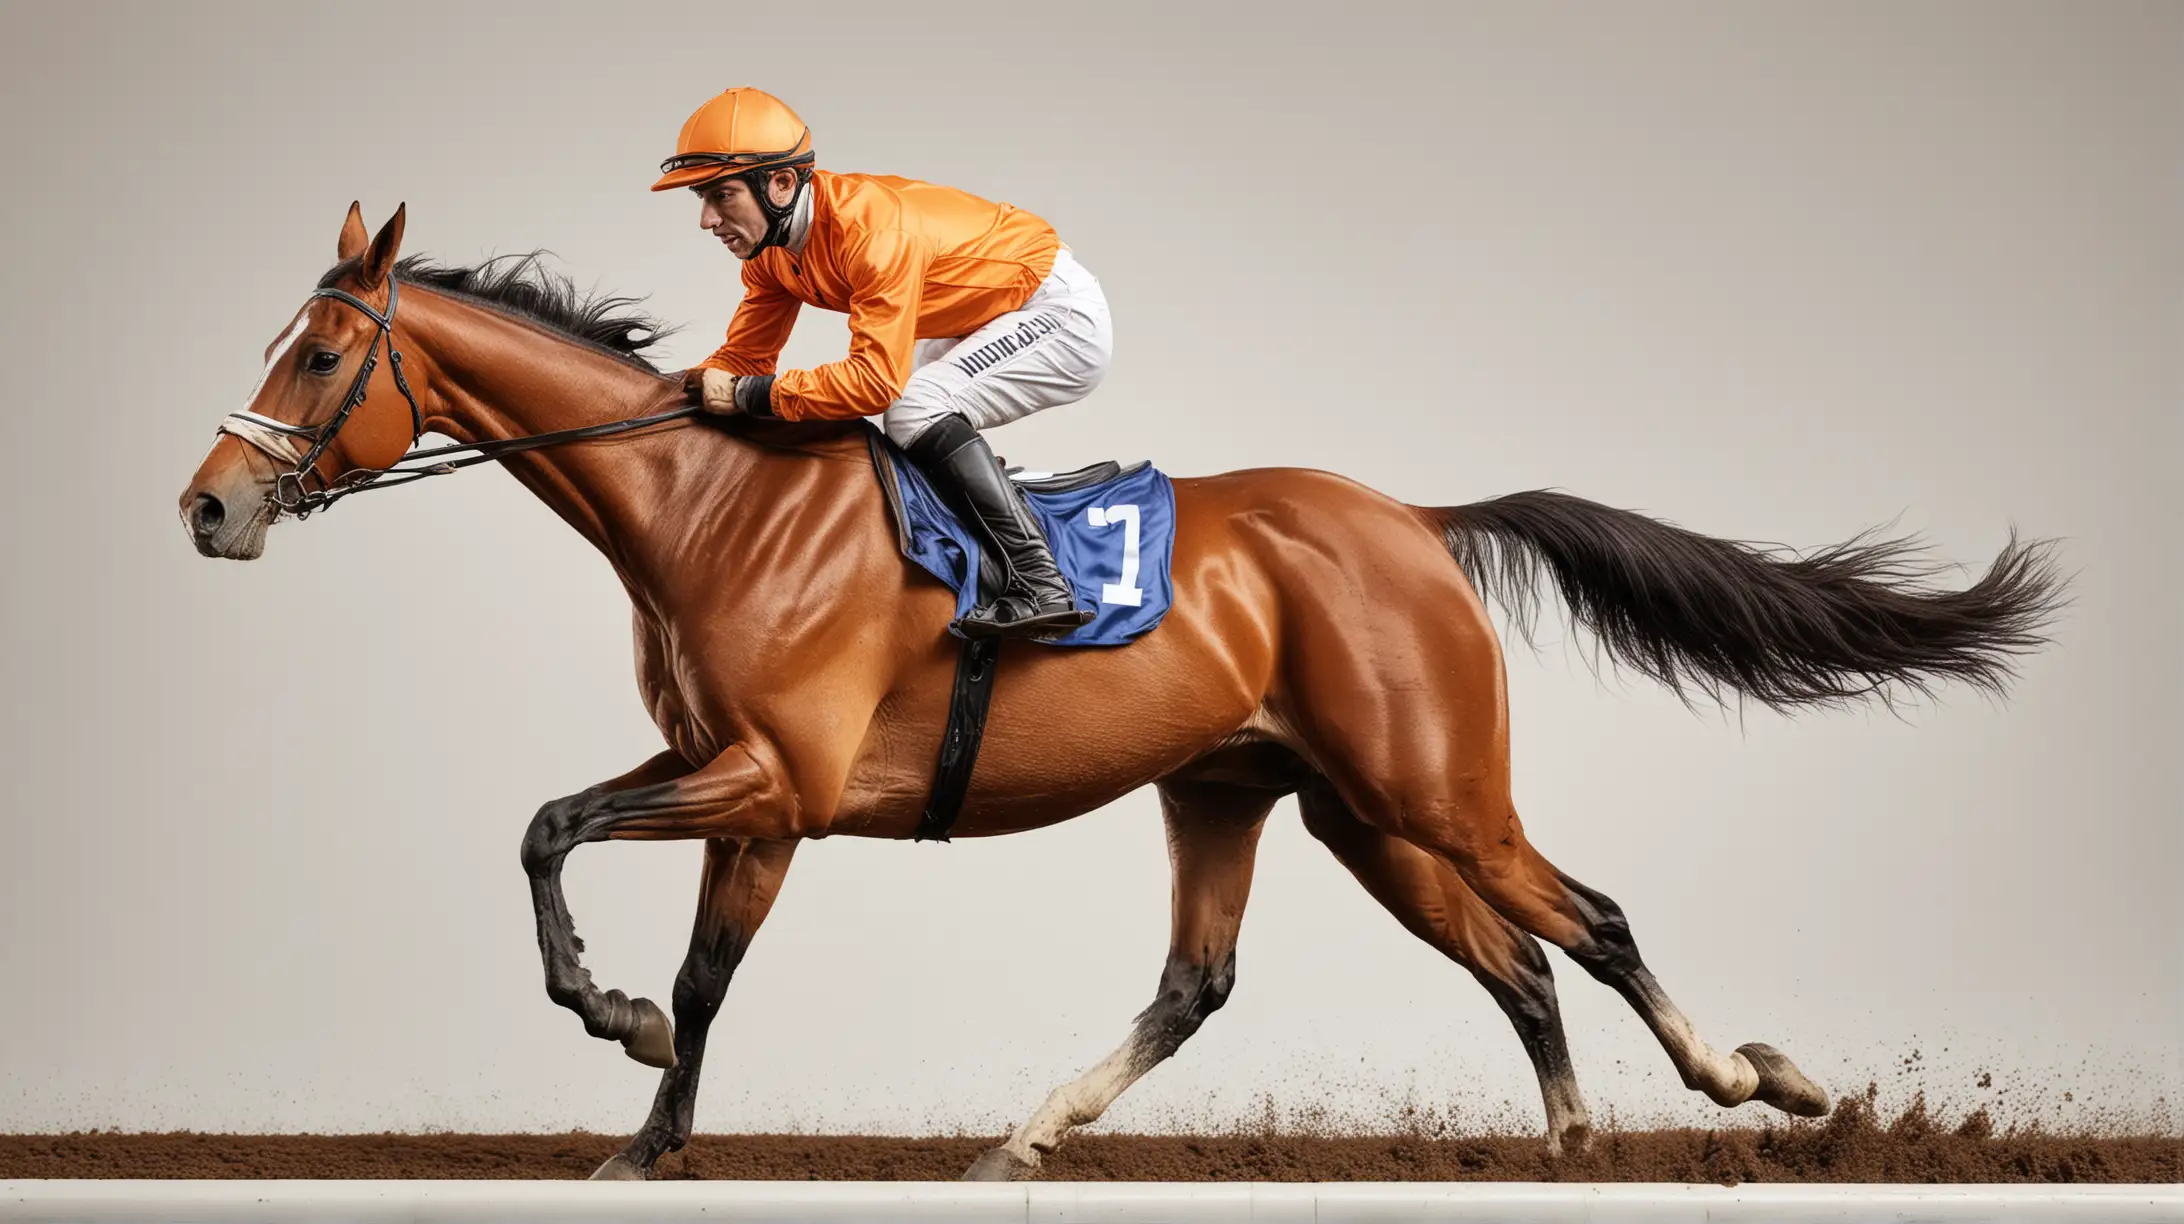 Racehorse with jockey at races. Isolated on a white background, orange jersey